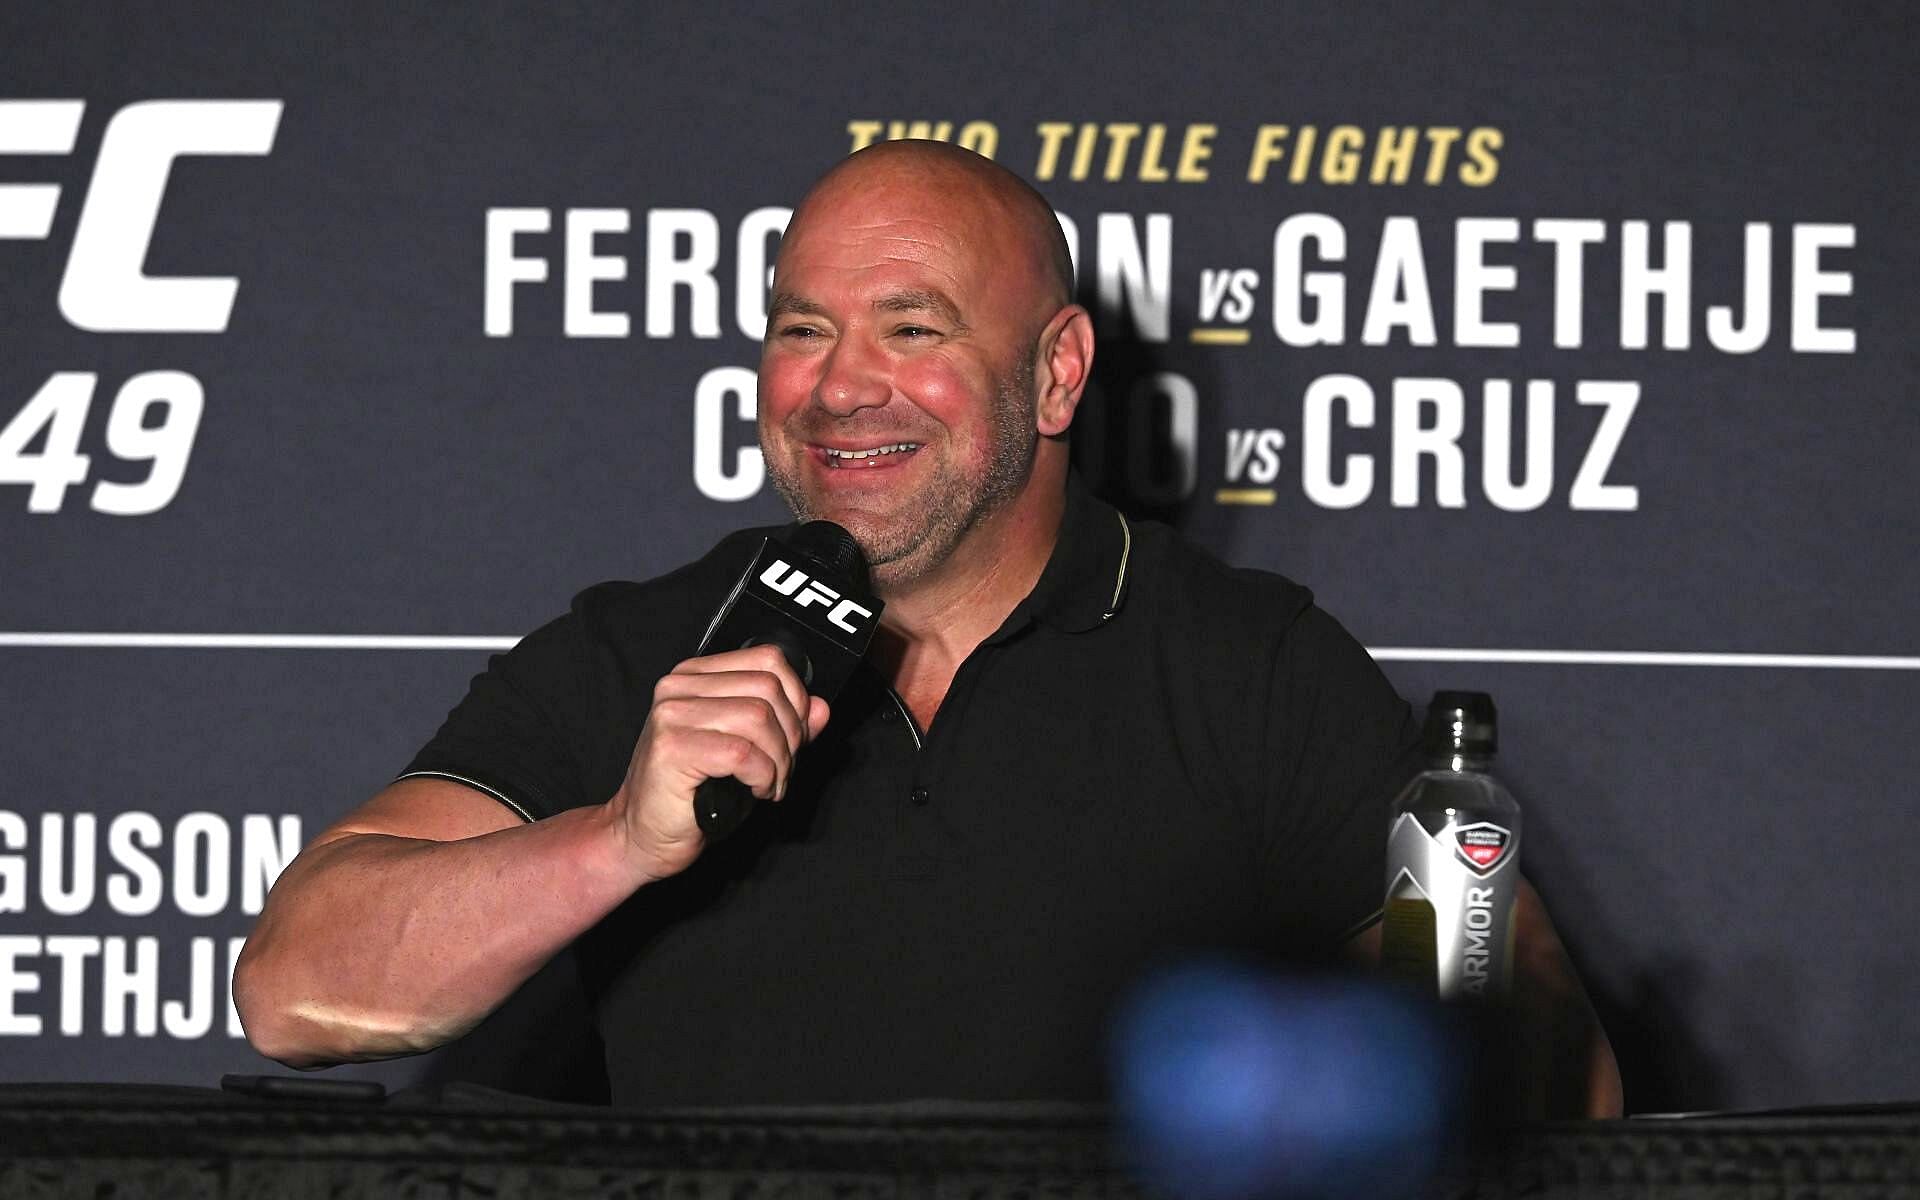 UFC President during a press conference at UFC 249